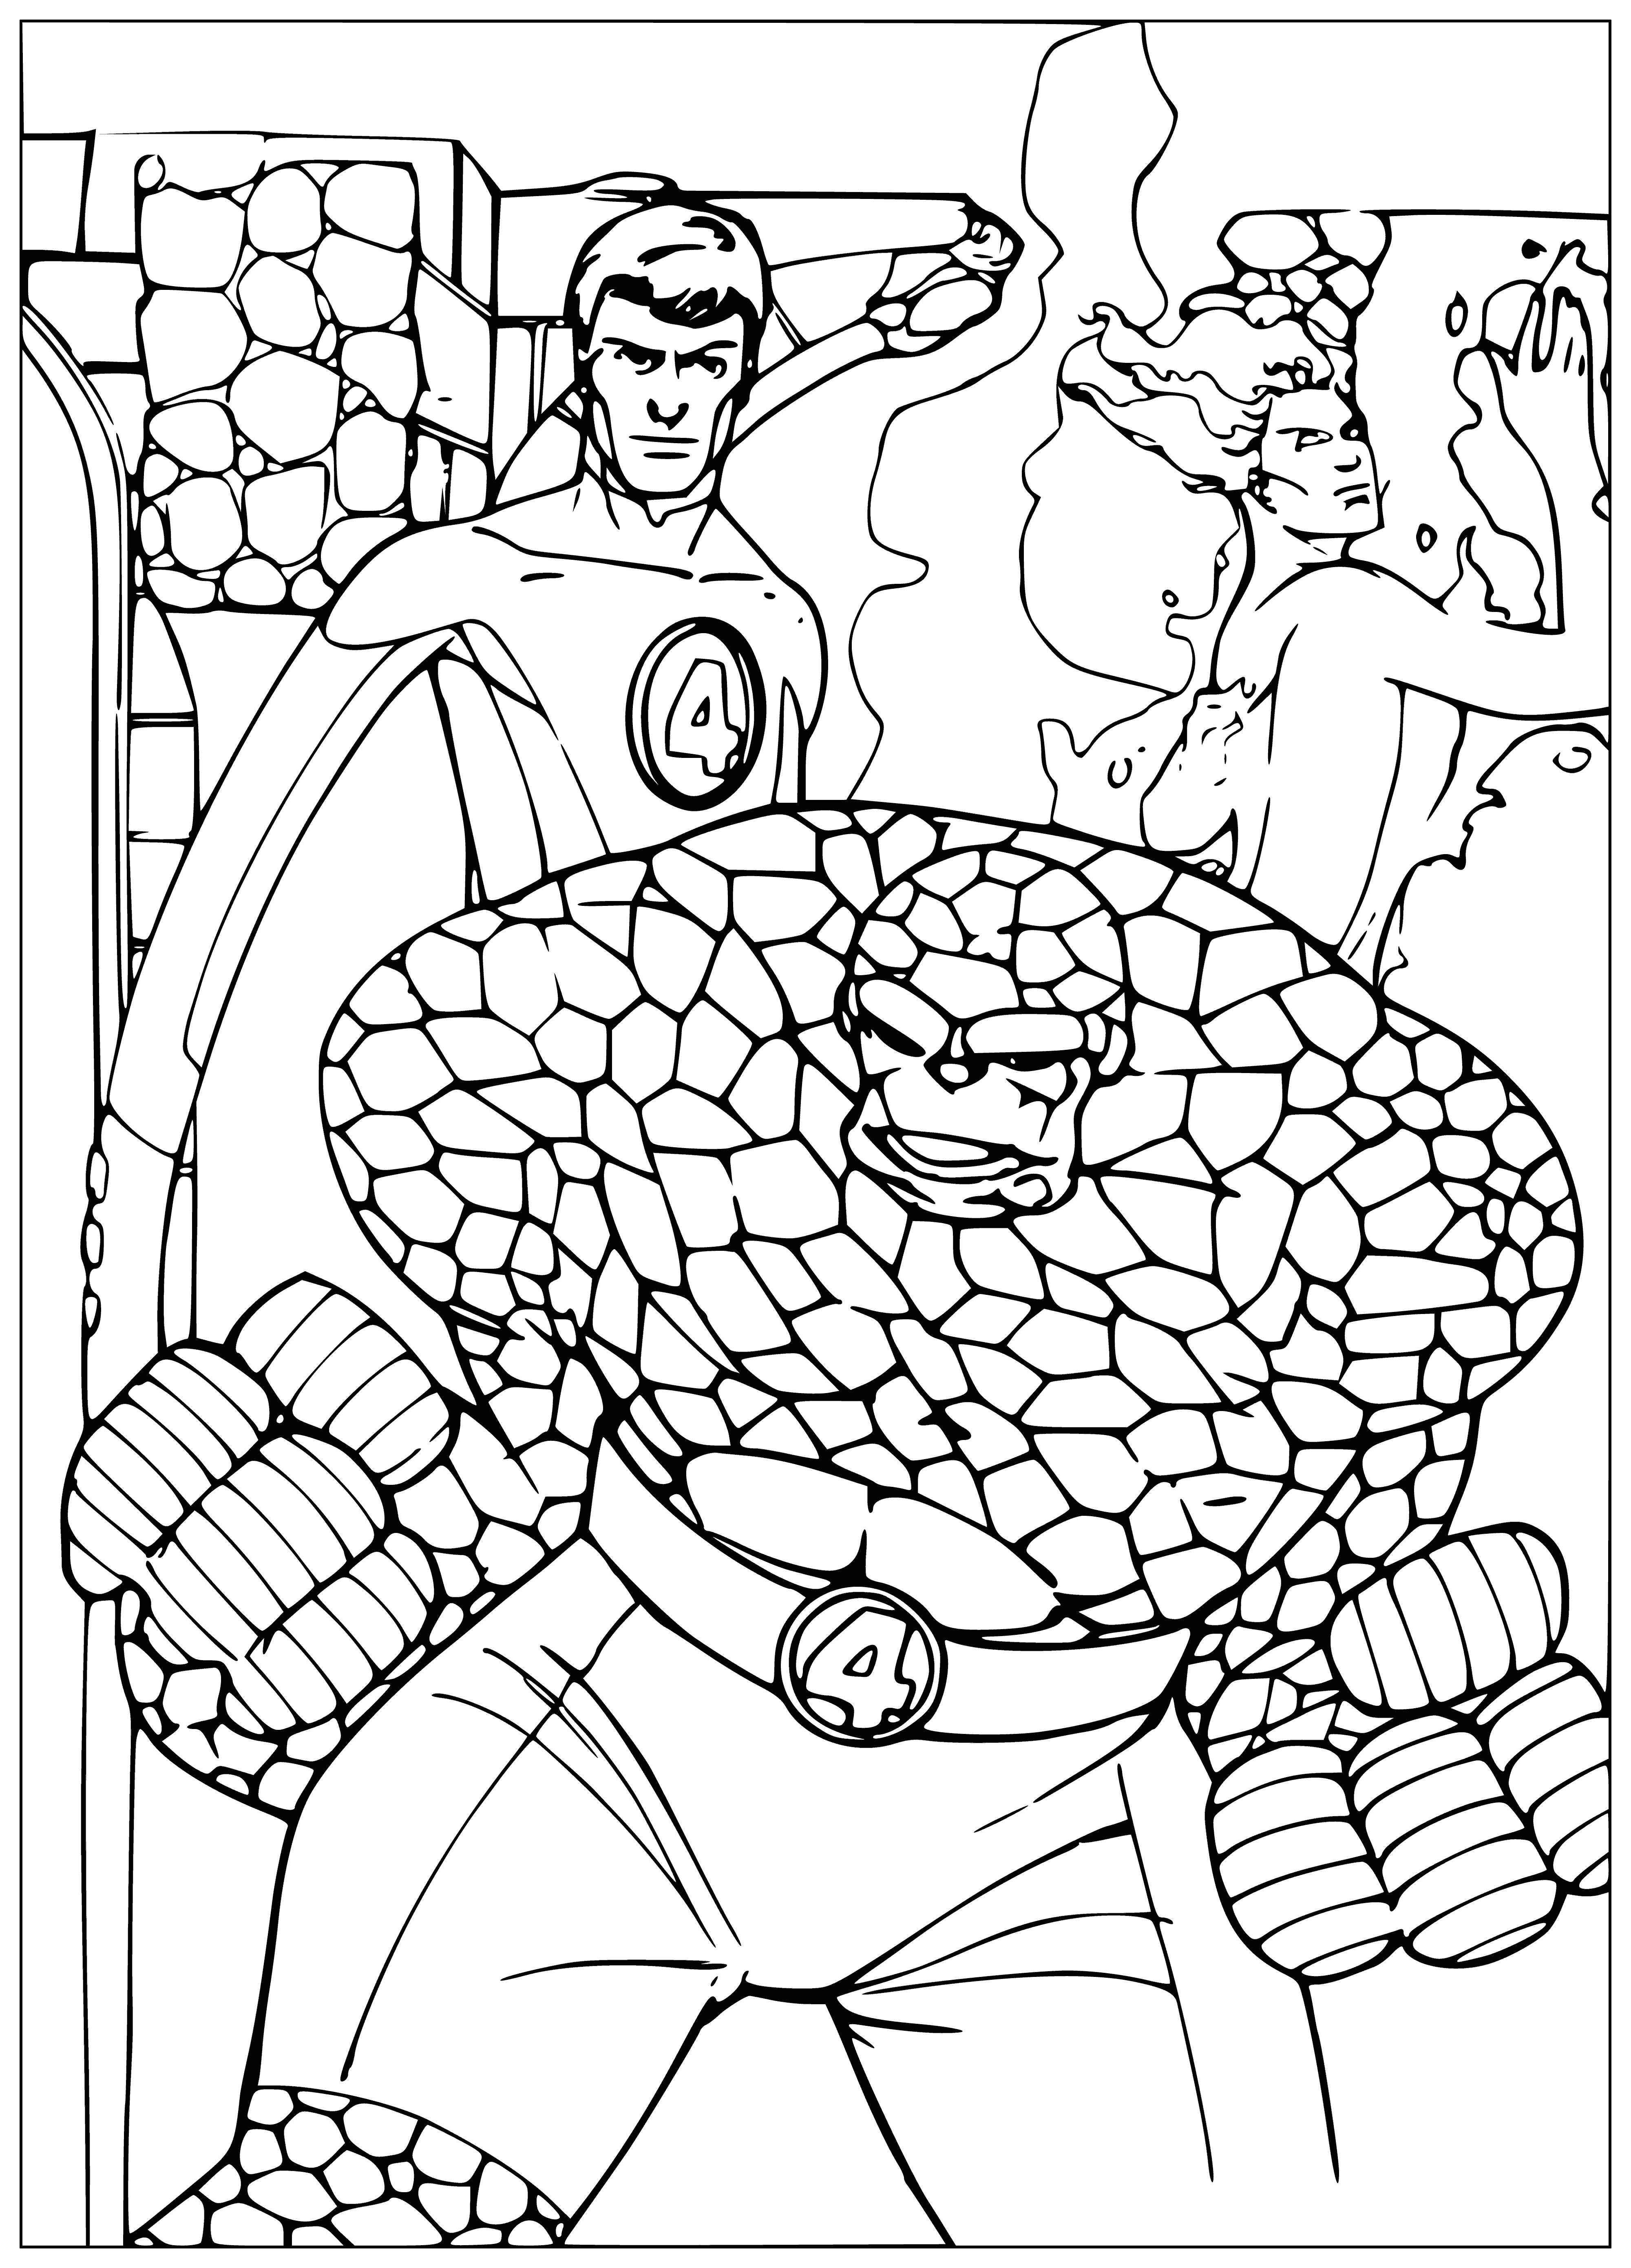 coloring page: The Fantastic Four are a team of four superpowered heroes who fight to protect the innocent from evil forces. #FantasticFour